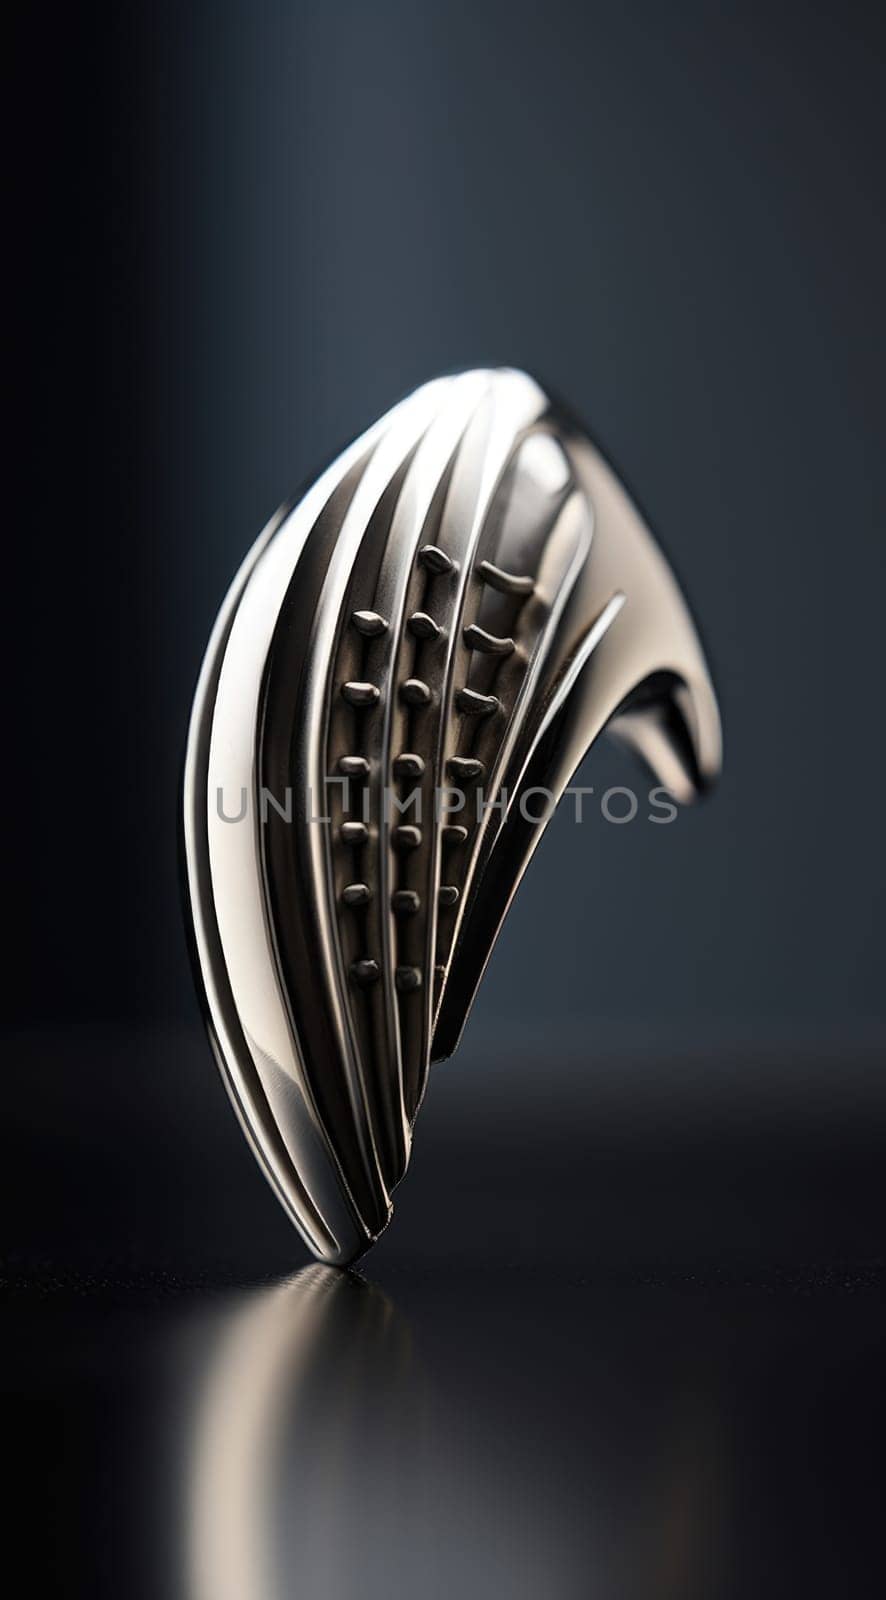 A silver ring with a curved design on it, AI by starush